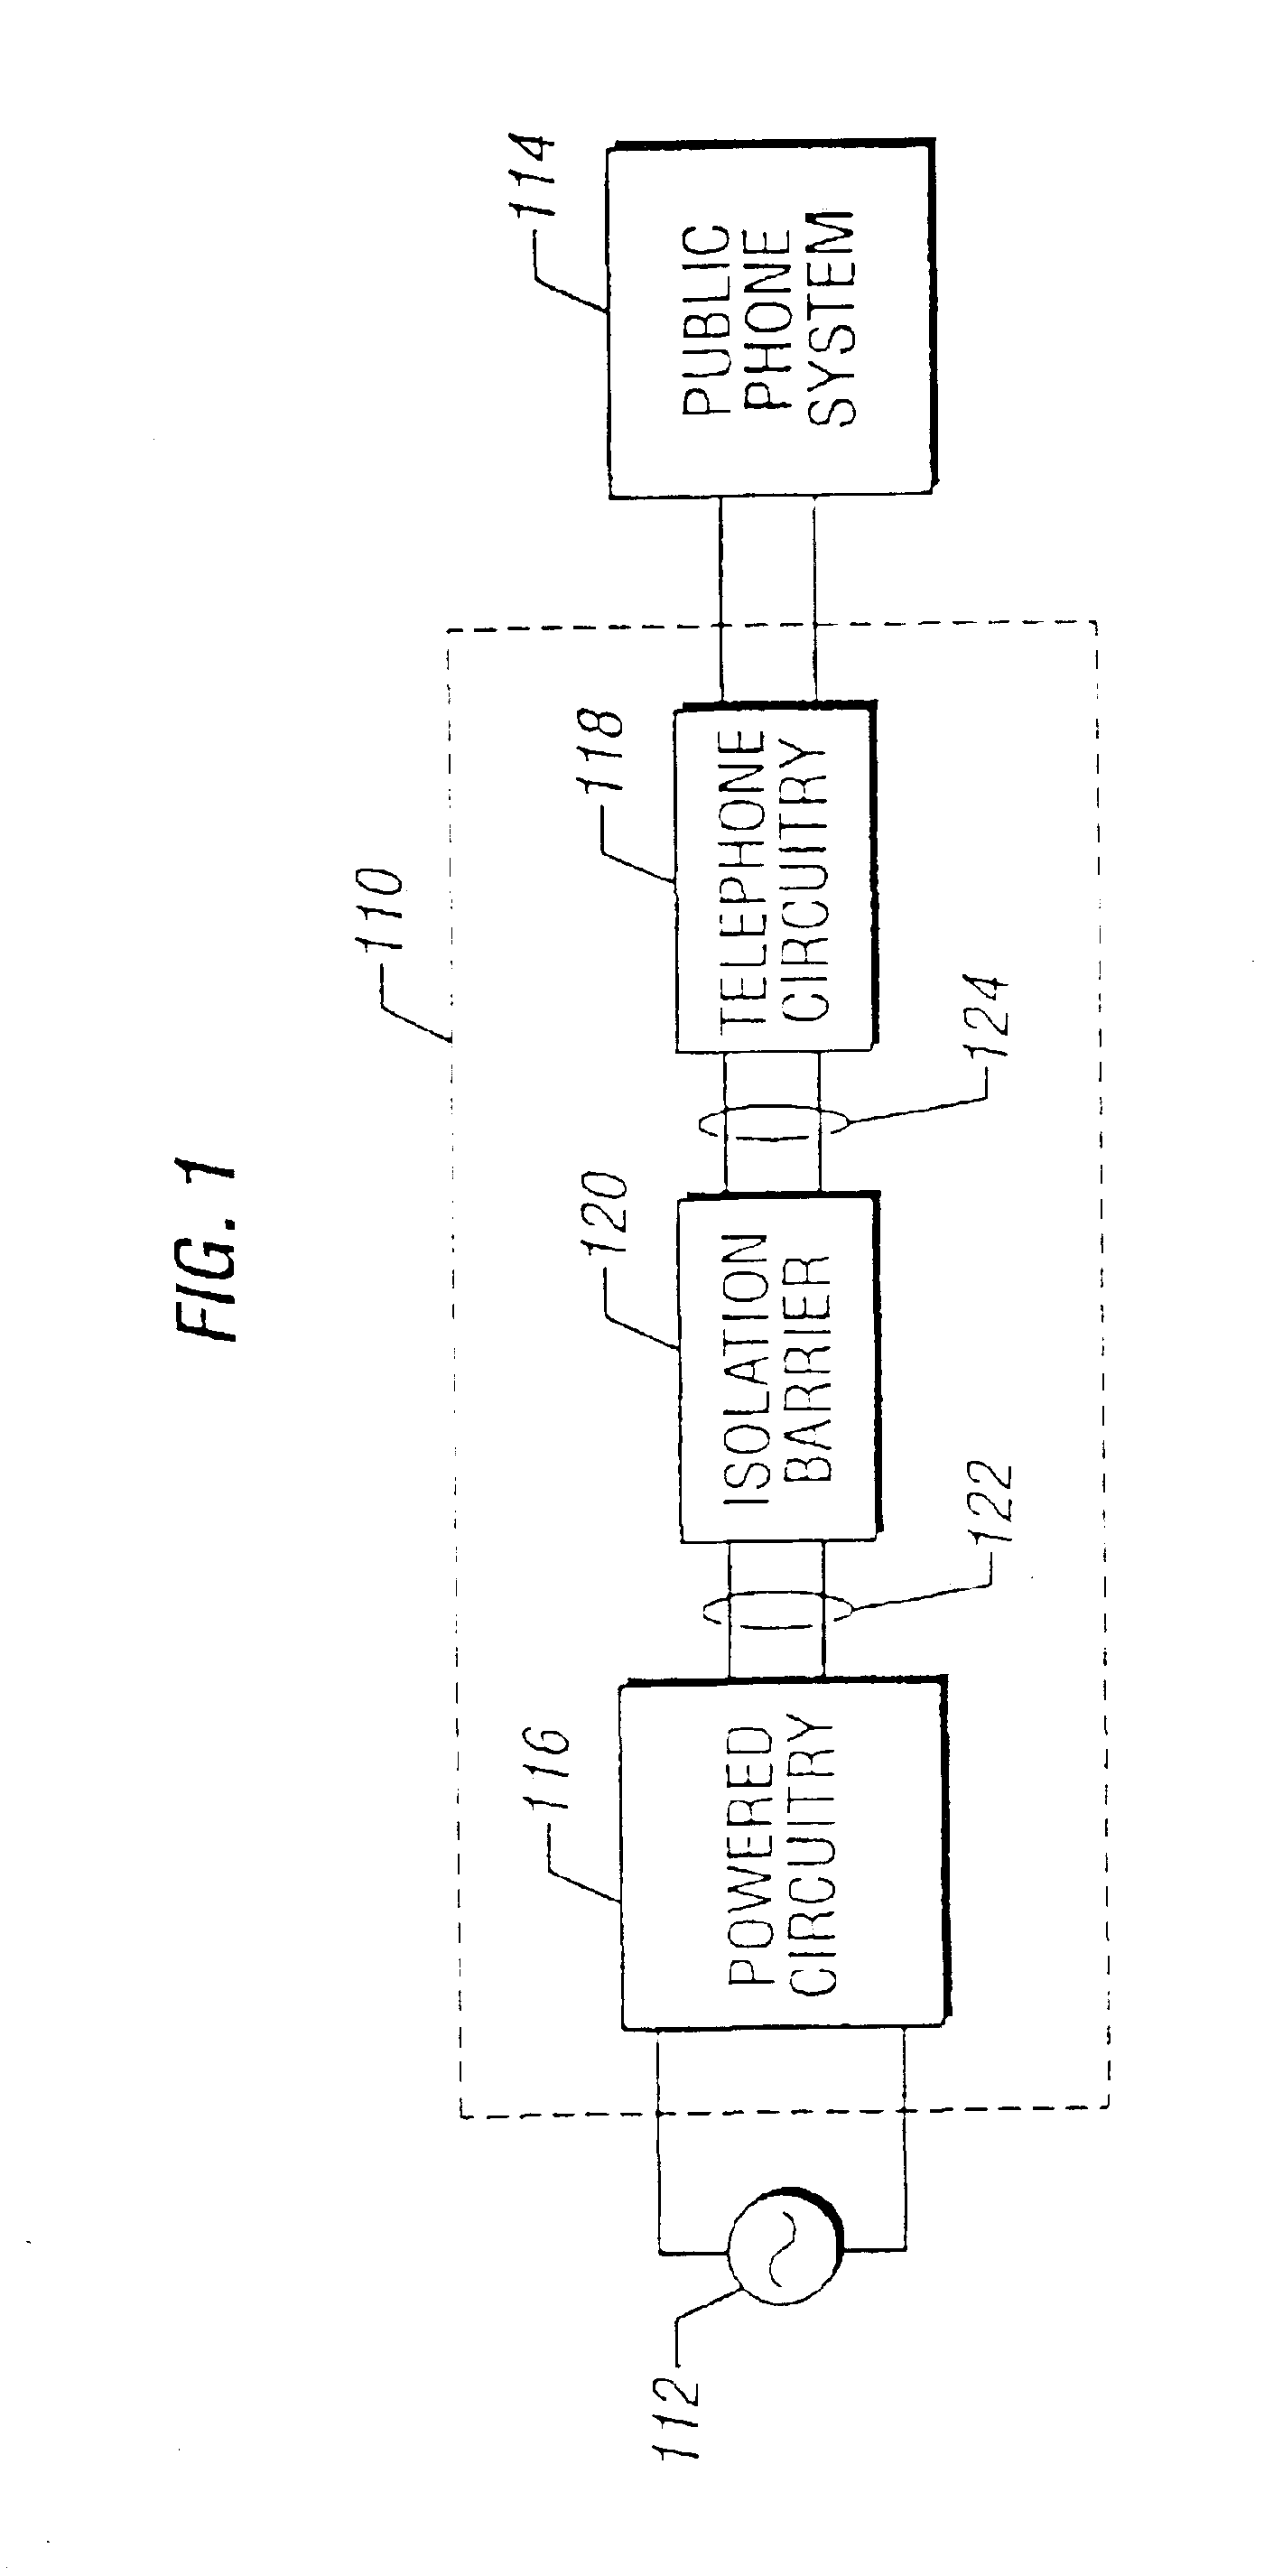 Loop current monitor circuitry and method for a communication system